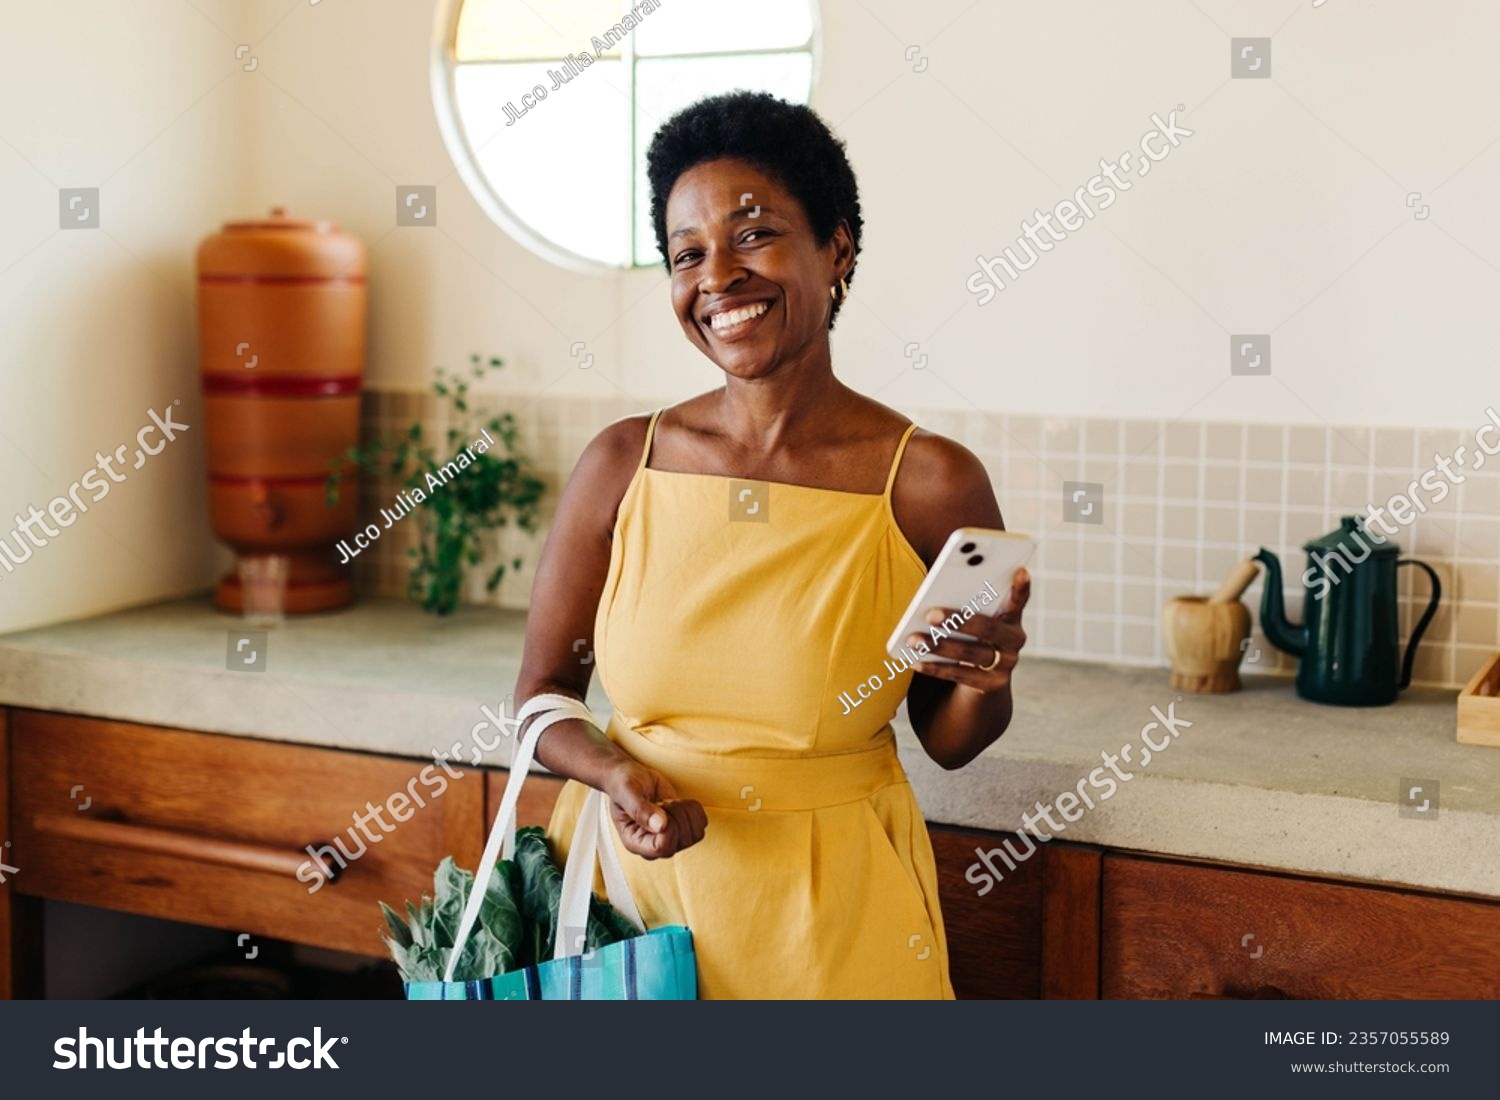 Smiling Brazilian woman stands in her kitchen, holding a bag of fresh vegetables. She confidently poses with her mobile phone, capturing the essence of her cheerful cooking and happy lifestyle. #2357055589